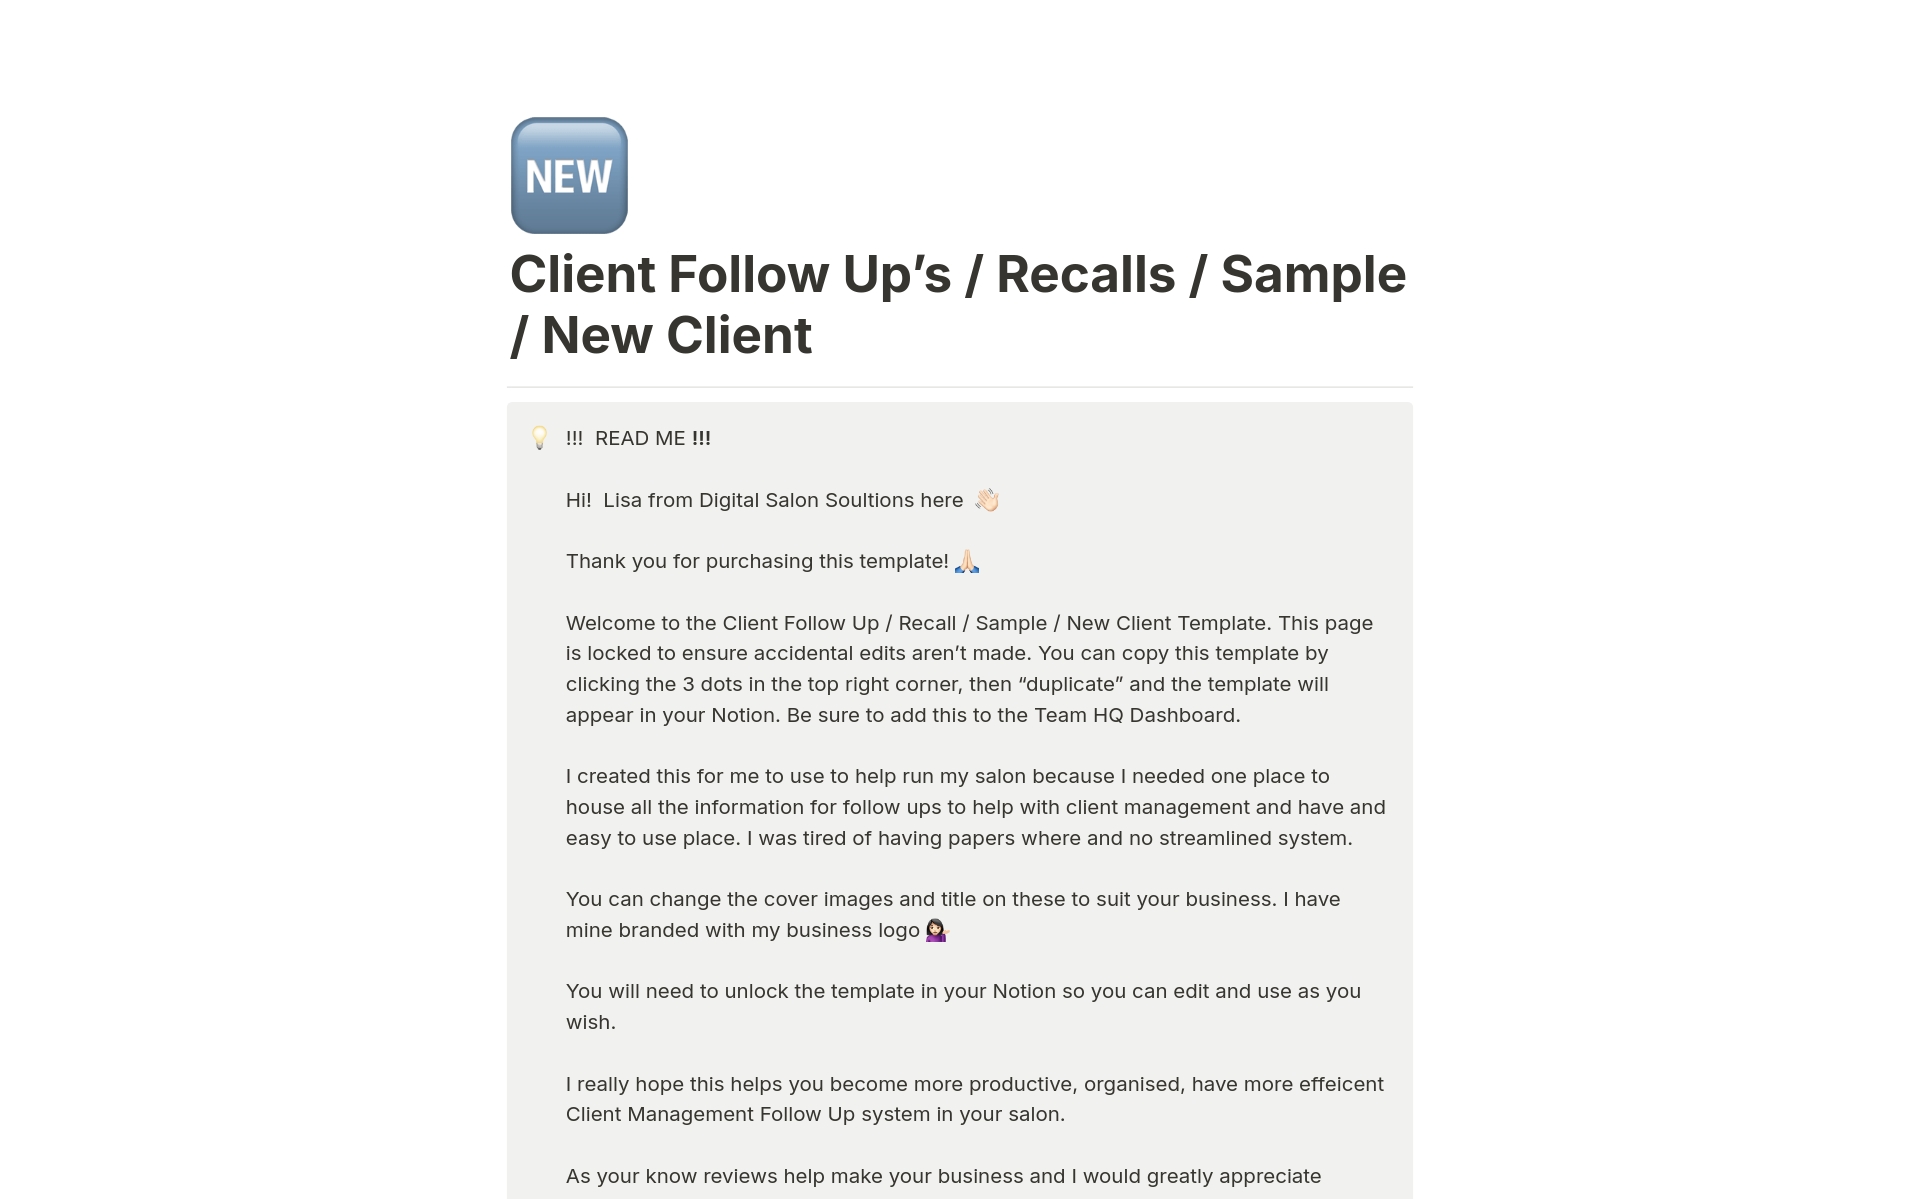 The Client Follow Up’s, Recalls, Sample, & New Client template is a notion template that is used for salon owners looking to maintain strong client relationships and streamline their business operations.